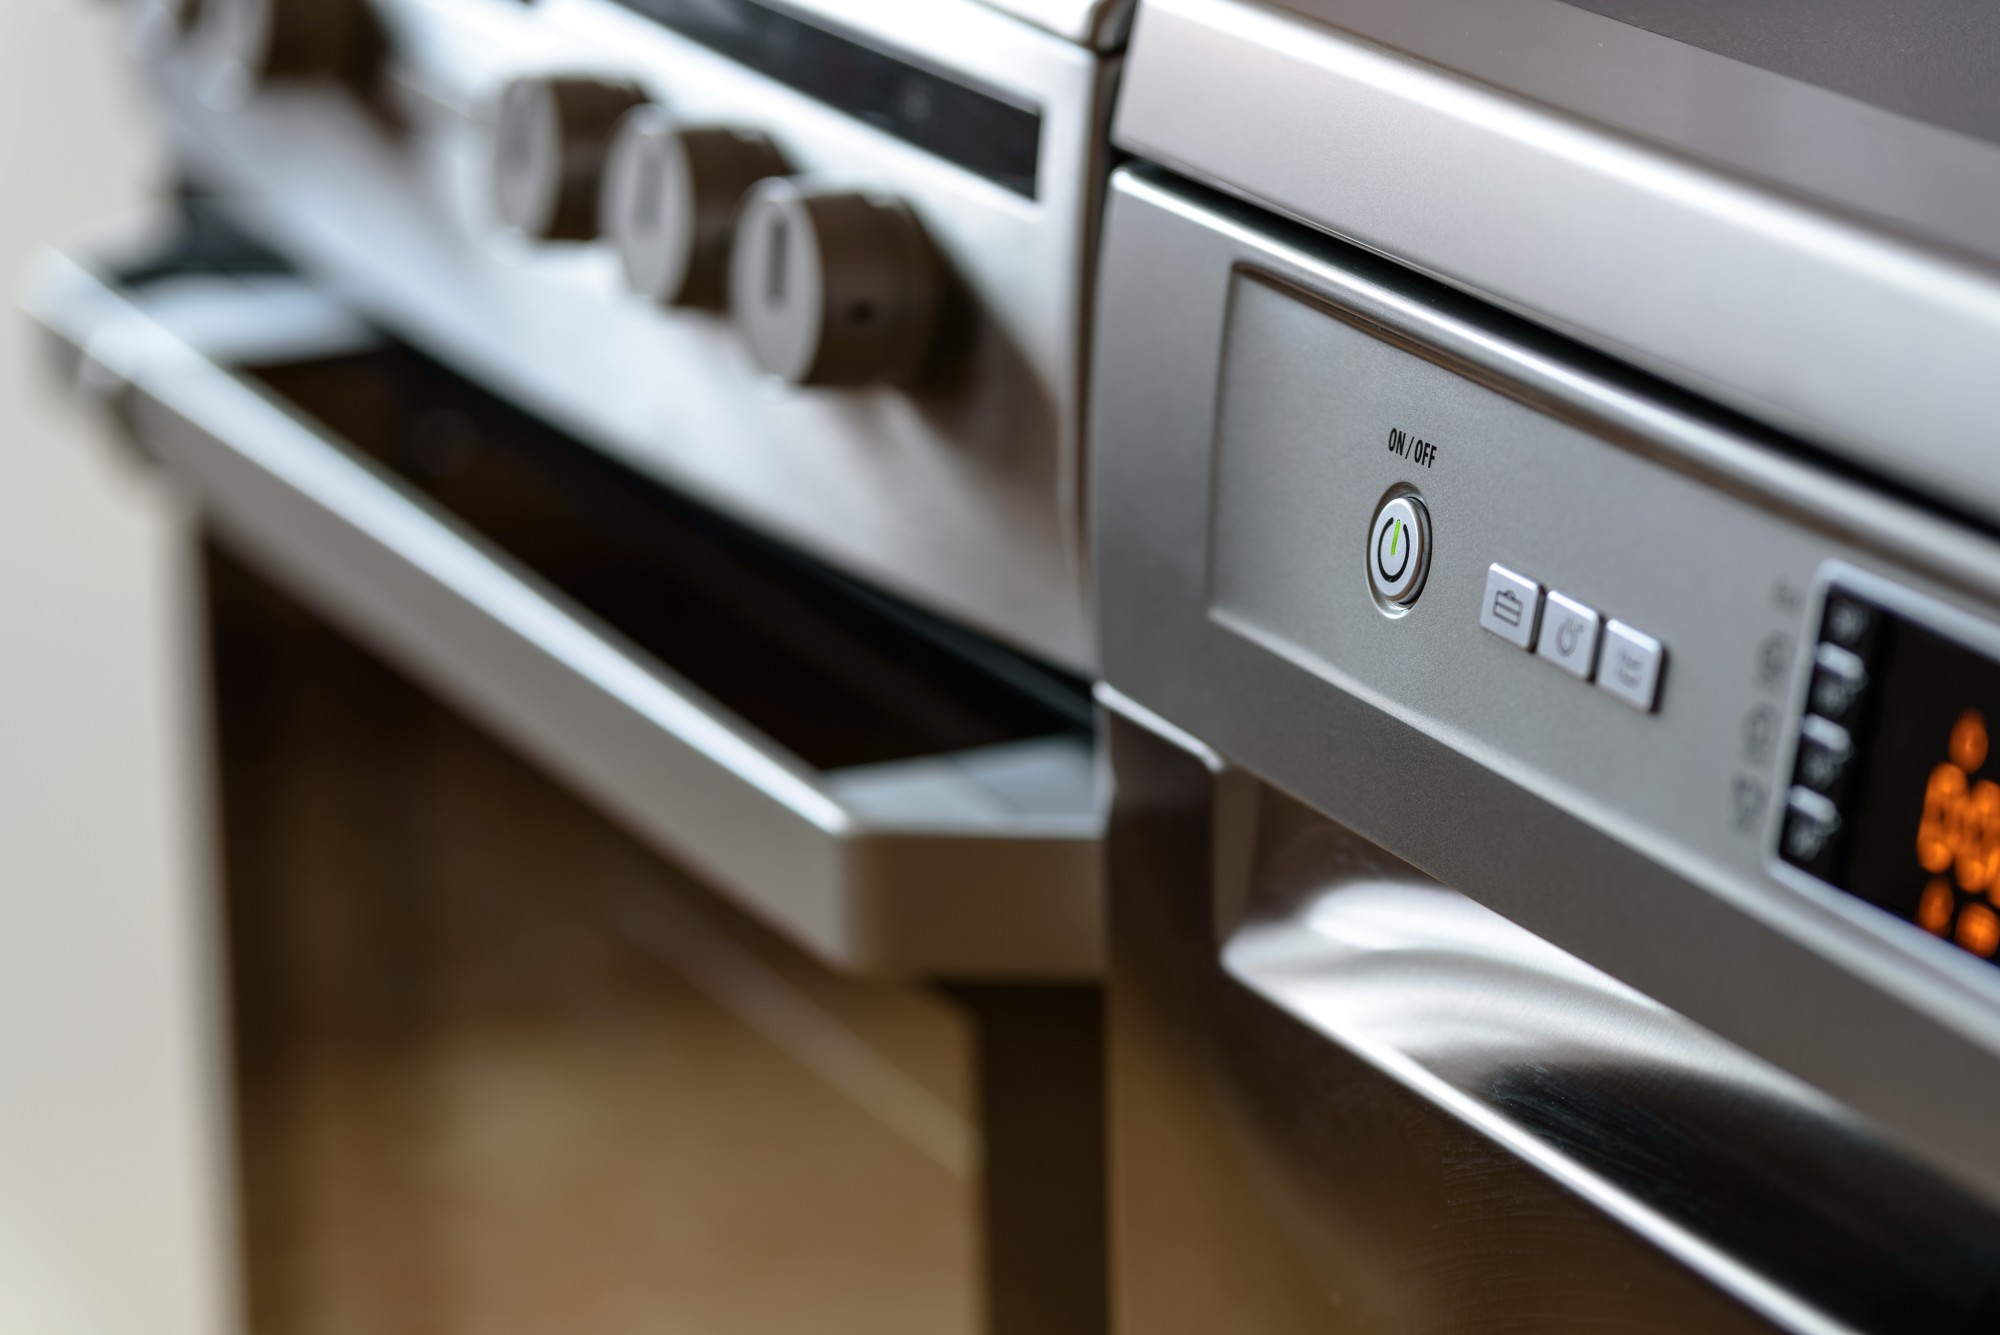 Looking to Modernize? Here Are Some Modern Appliances for Your Kitchen That Will Make It Beautiful